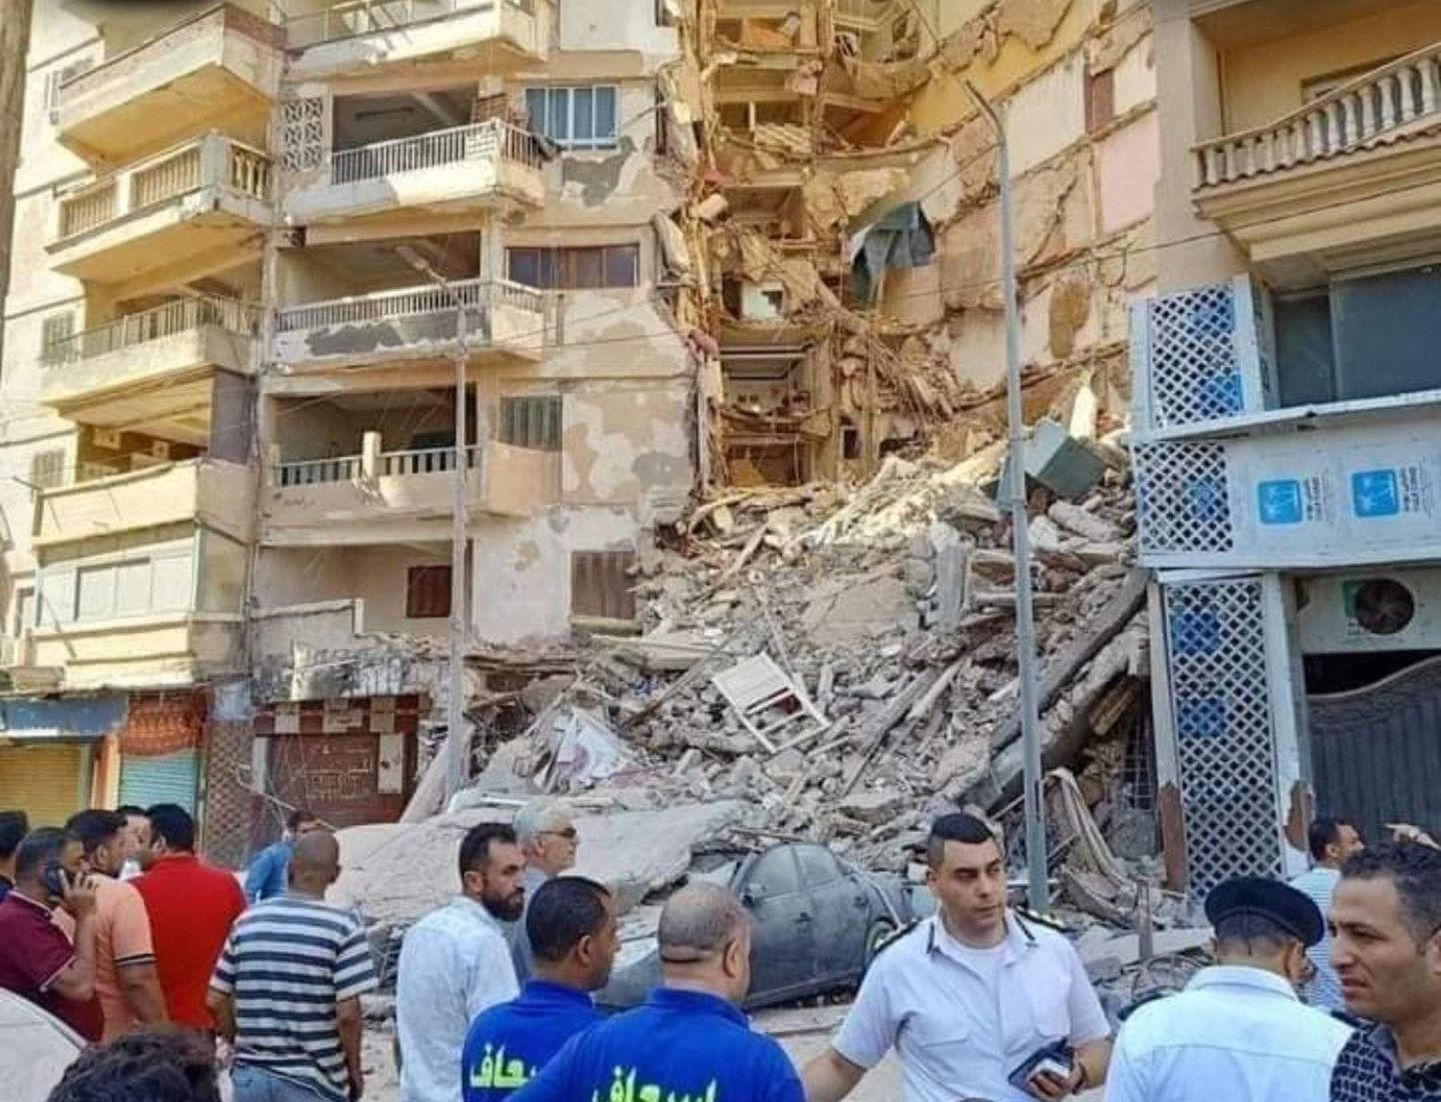 Death Toll Rises To 14 In Building Collapse In S. Egypt